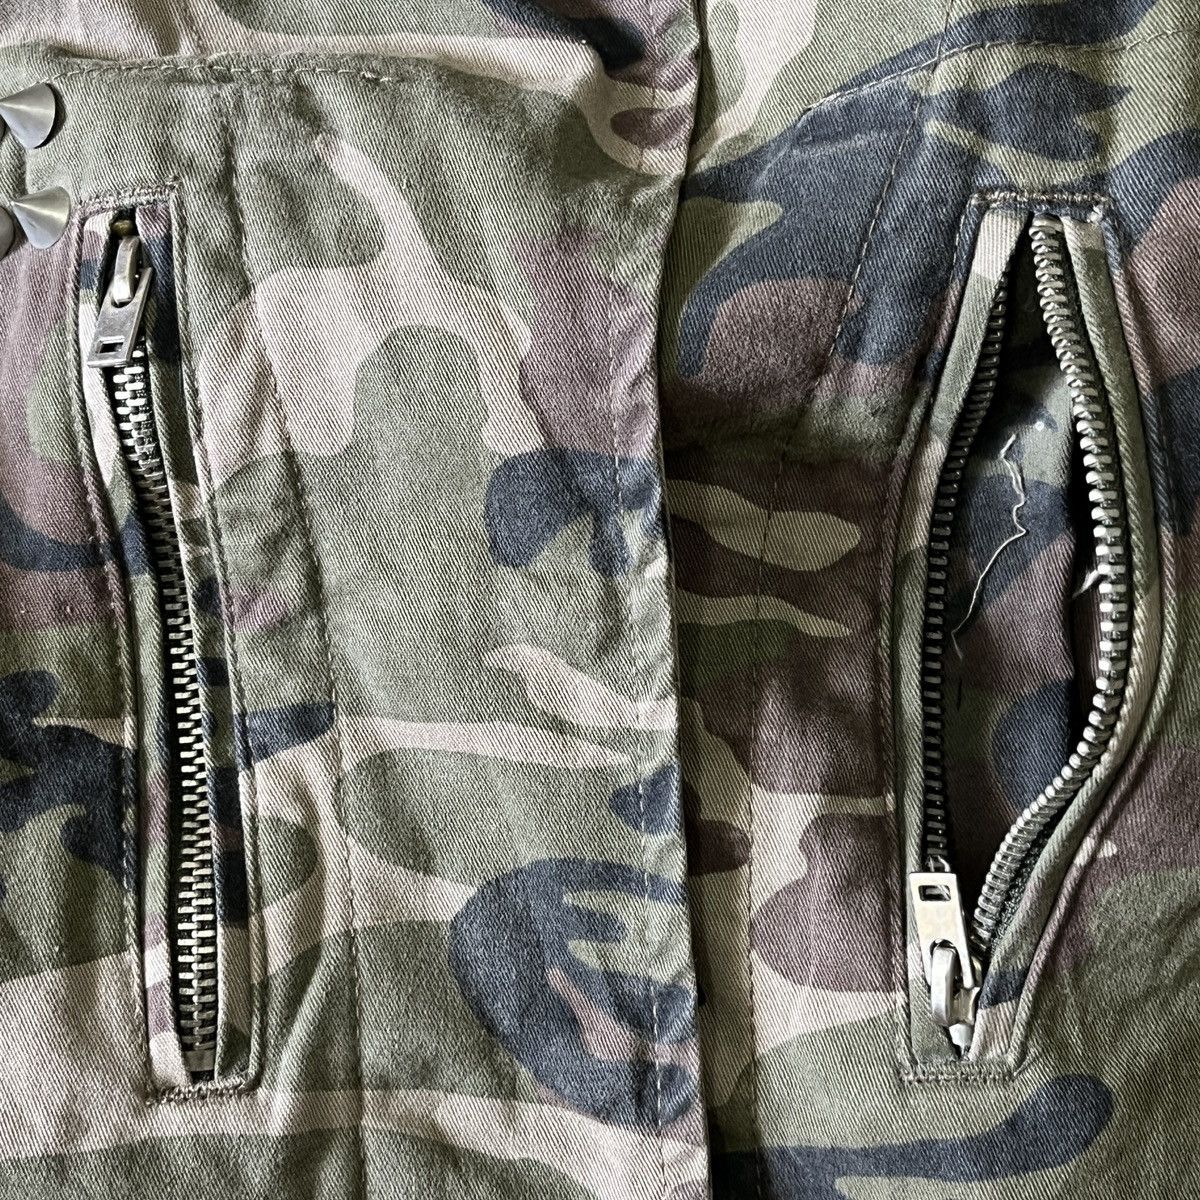 Military - Punk Army Seditionaries Jackets With Studs - 16